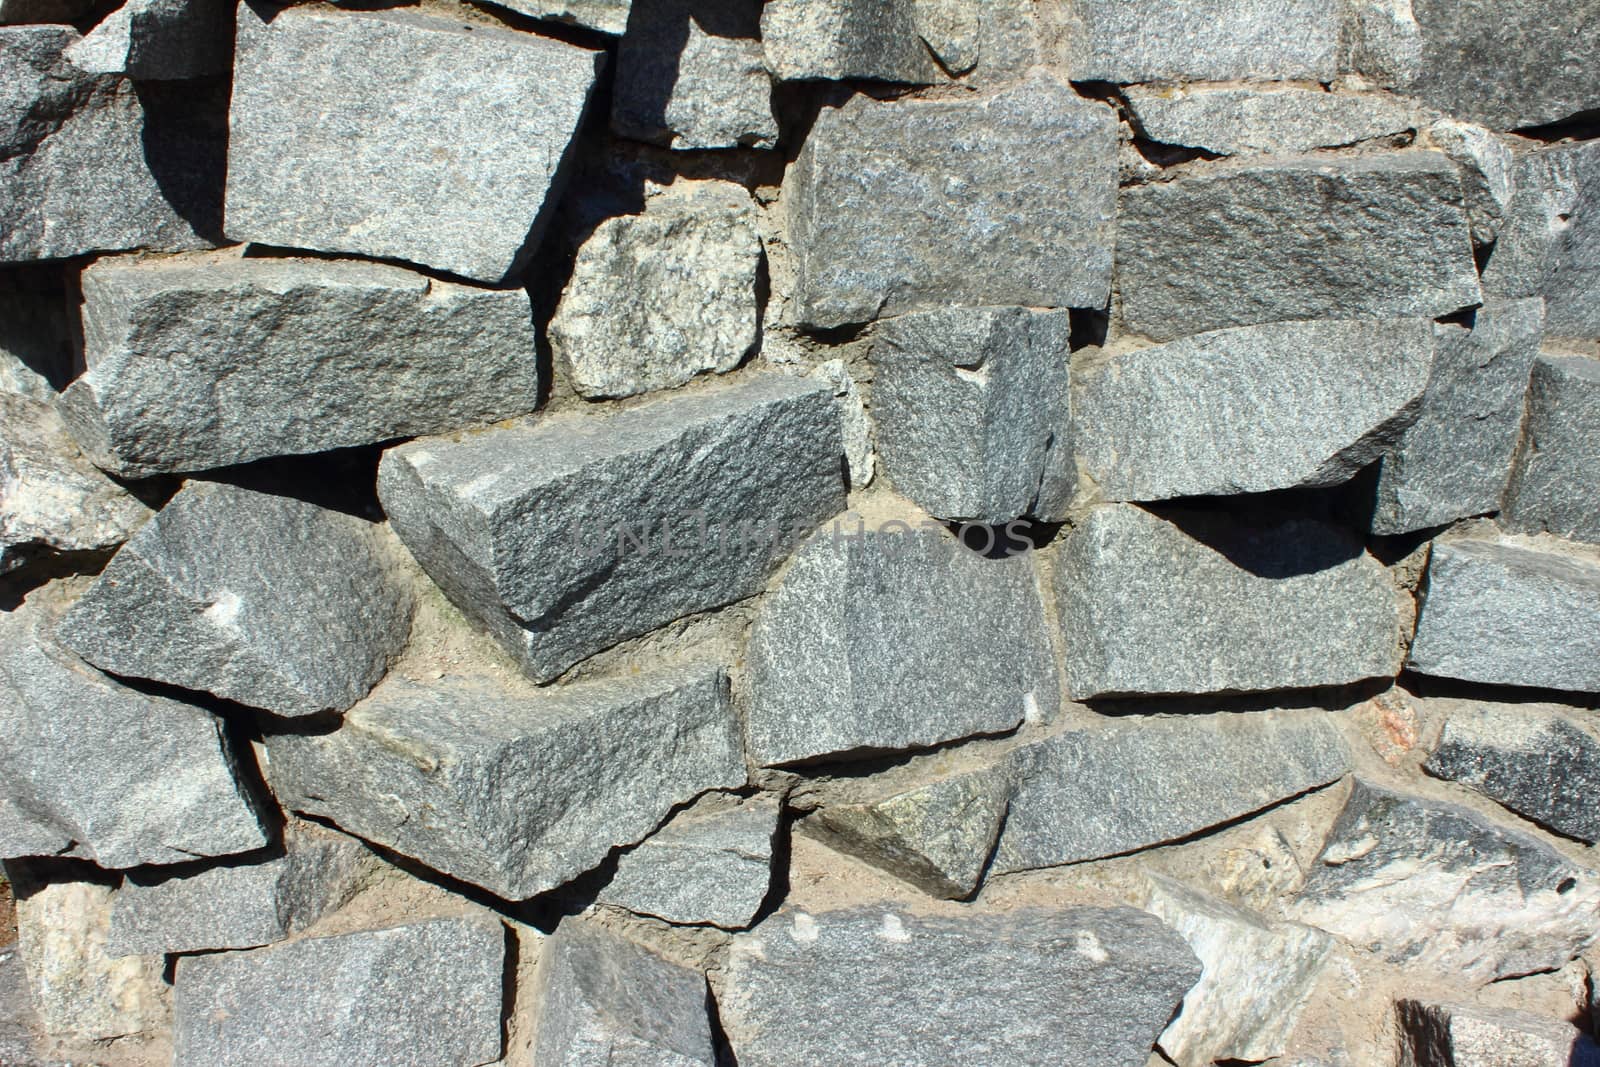 Large dark gray stones stacked as a wall